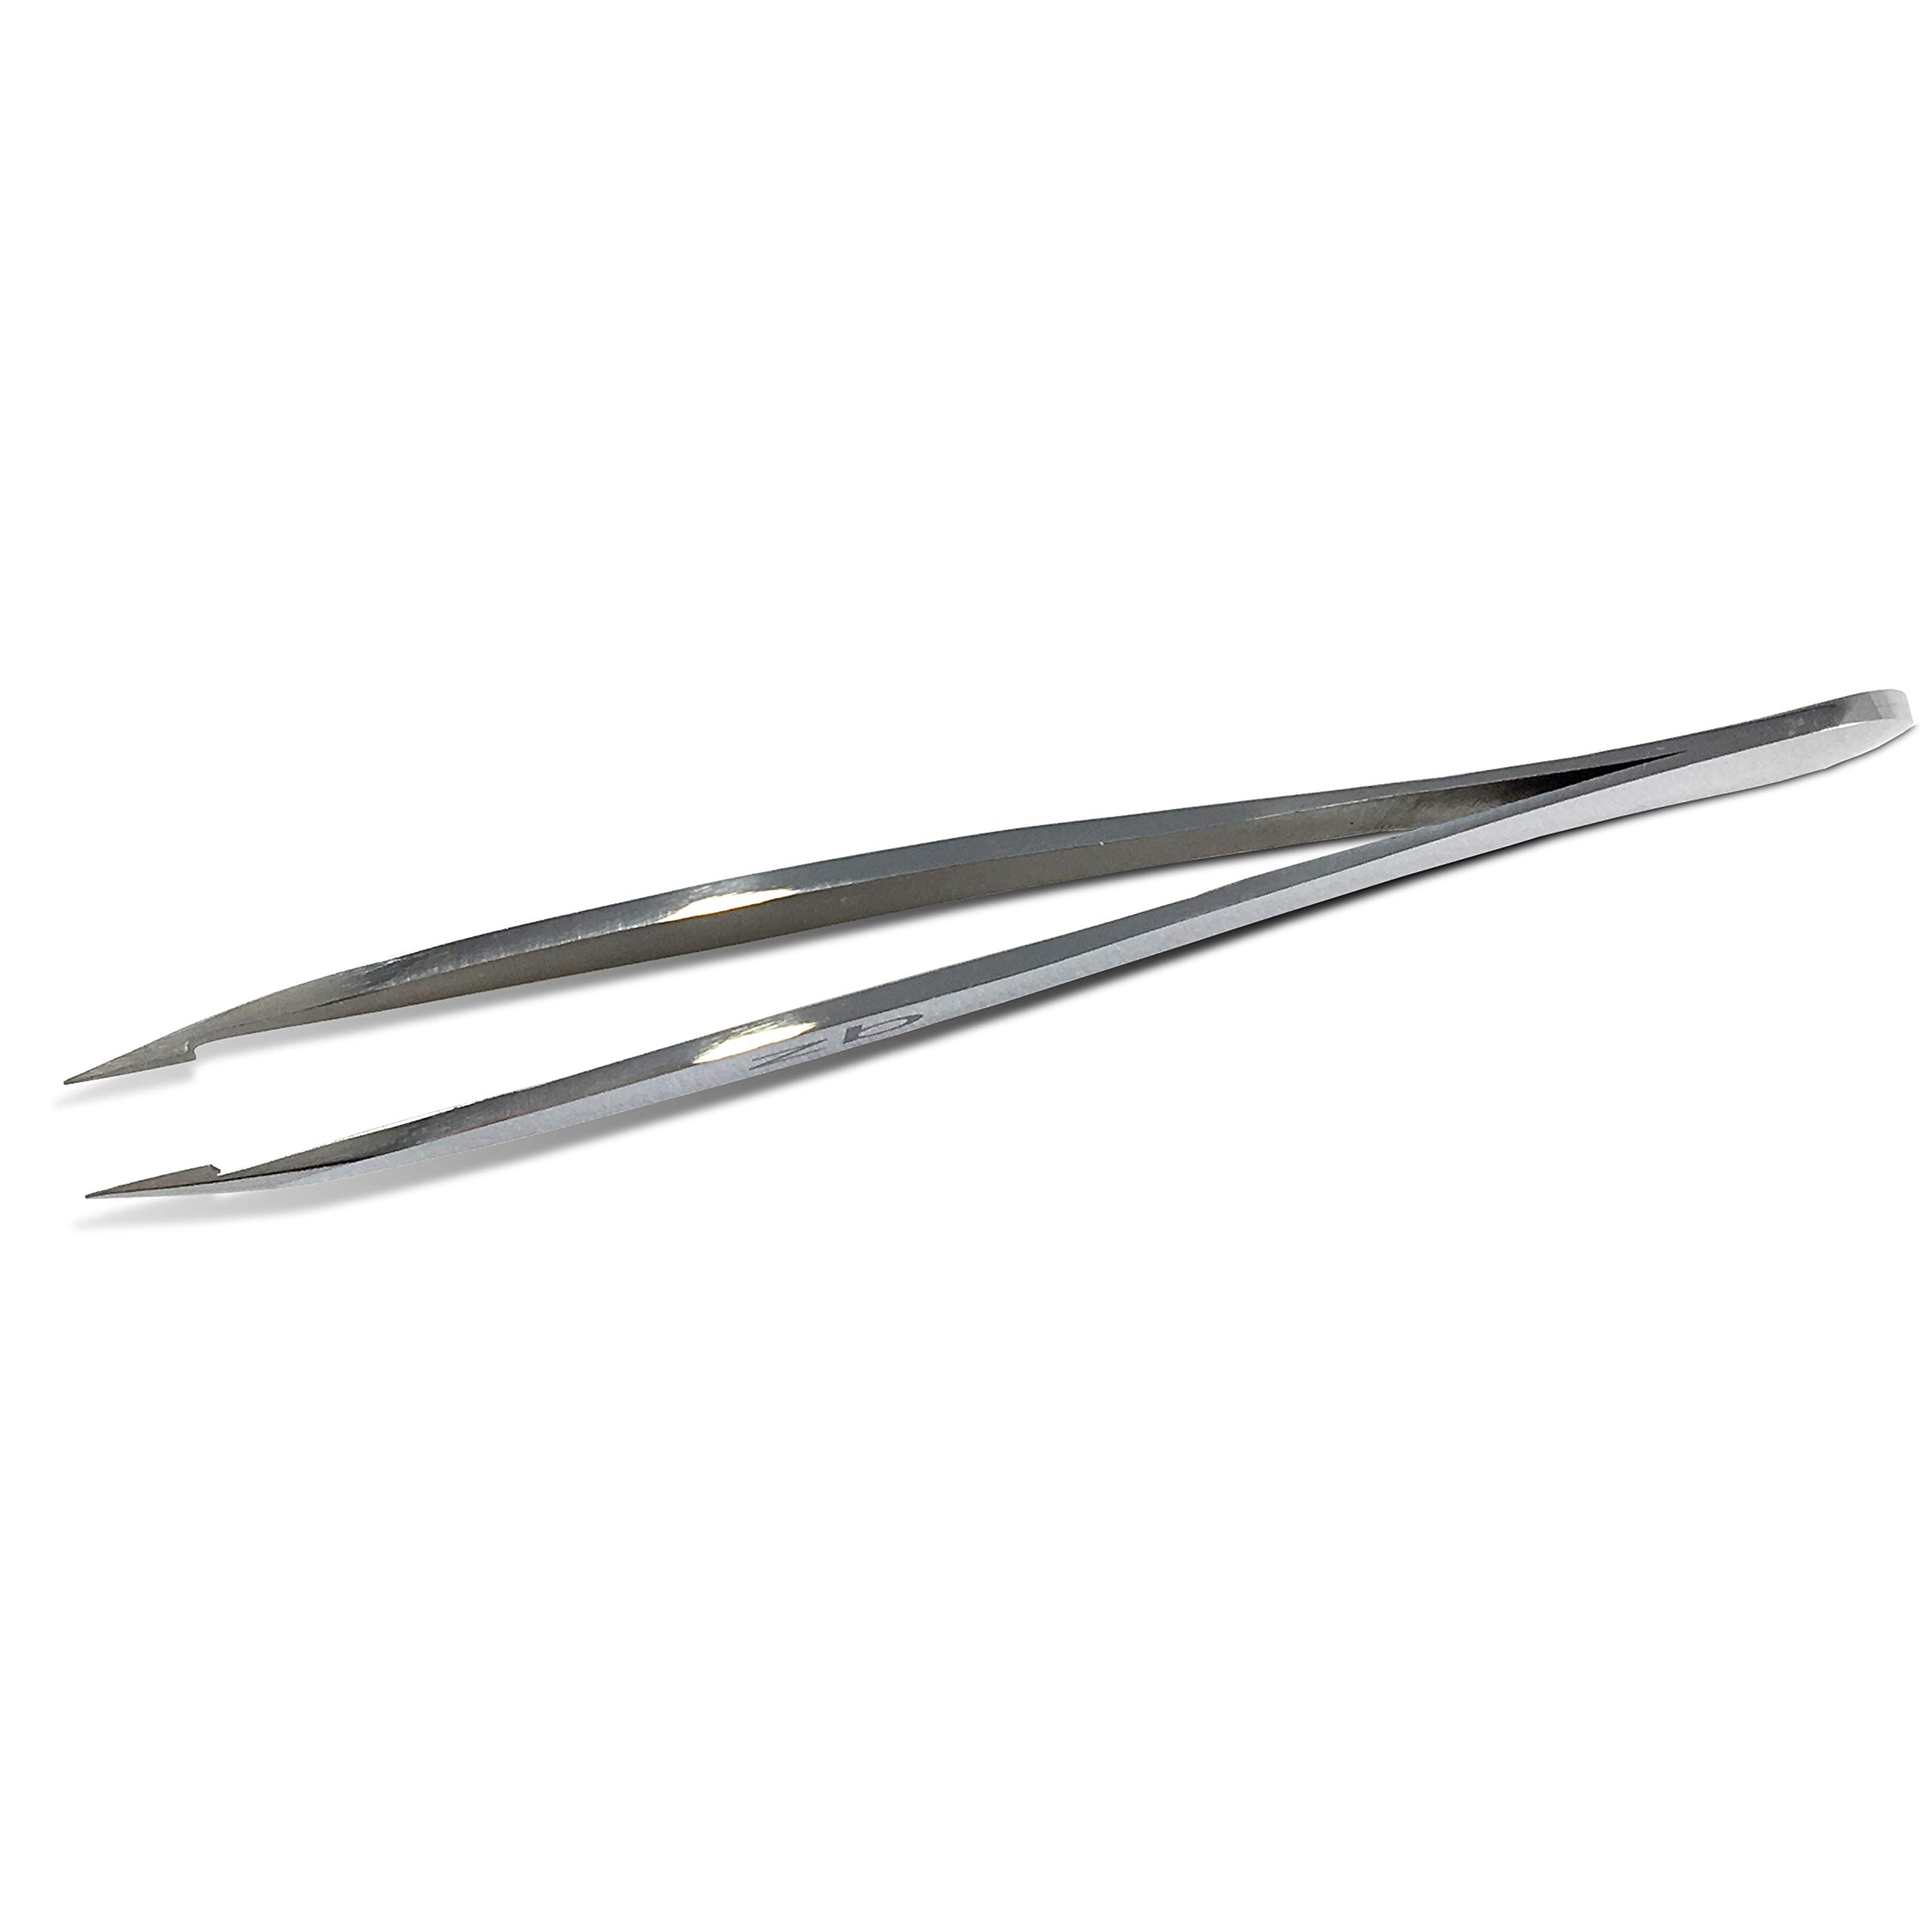 Zizzili Basics Elite Series Pointed Tweezers - Sharp Precision Tips + Surgical Grade Stainless Steel Tweezer for Professional Eyebrow and Facial Hair Removal